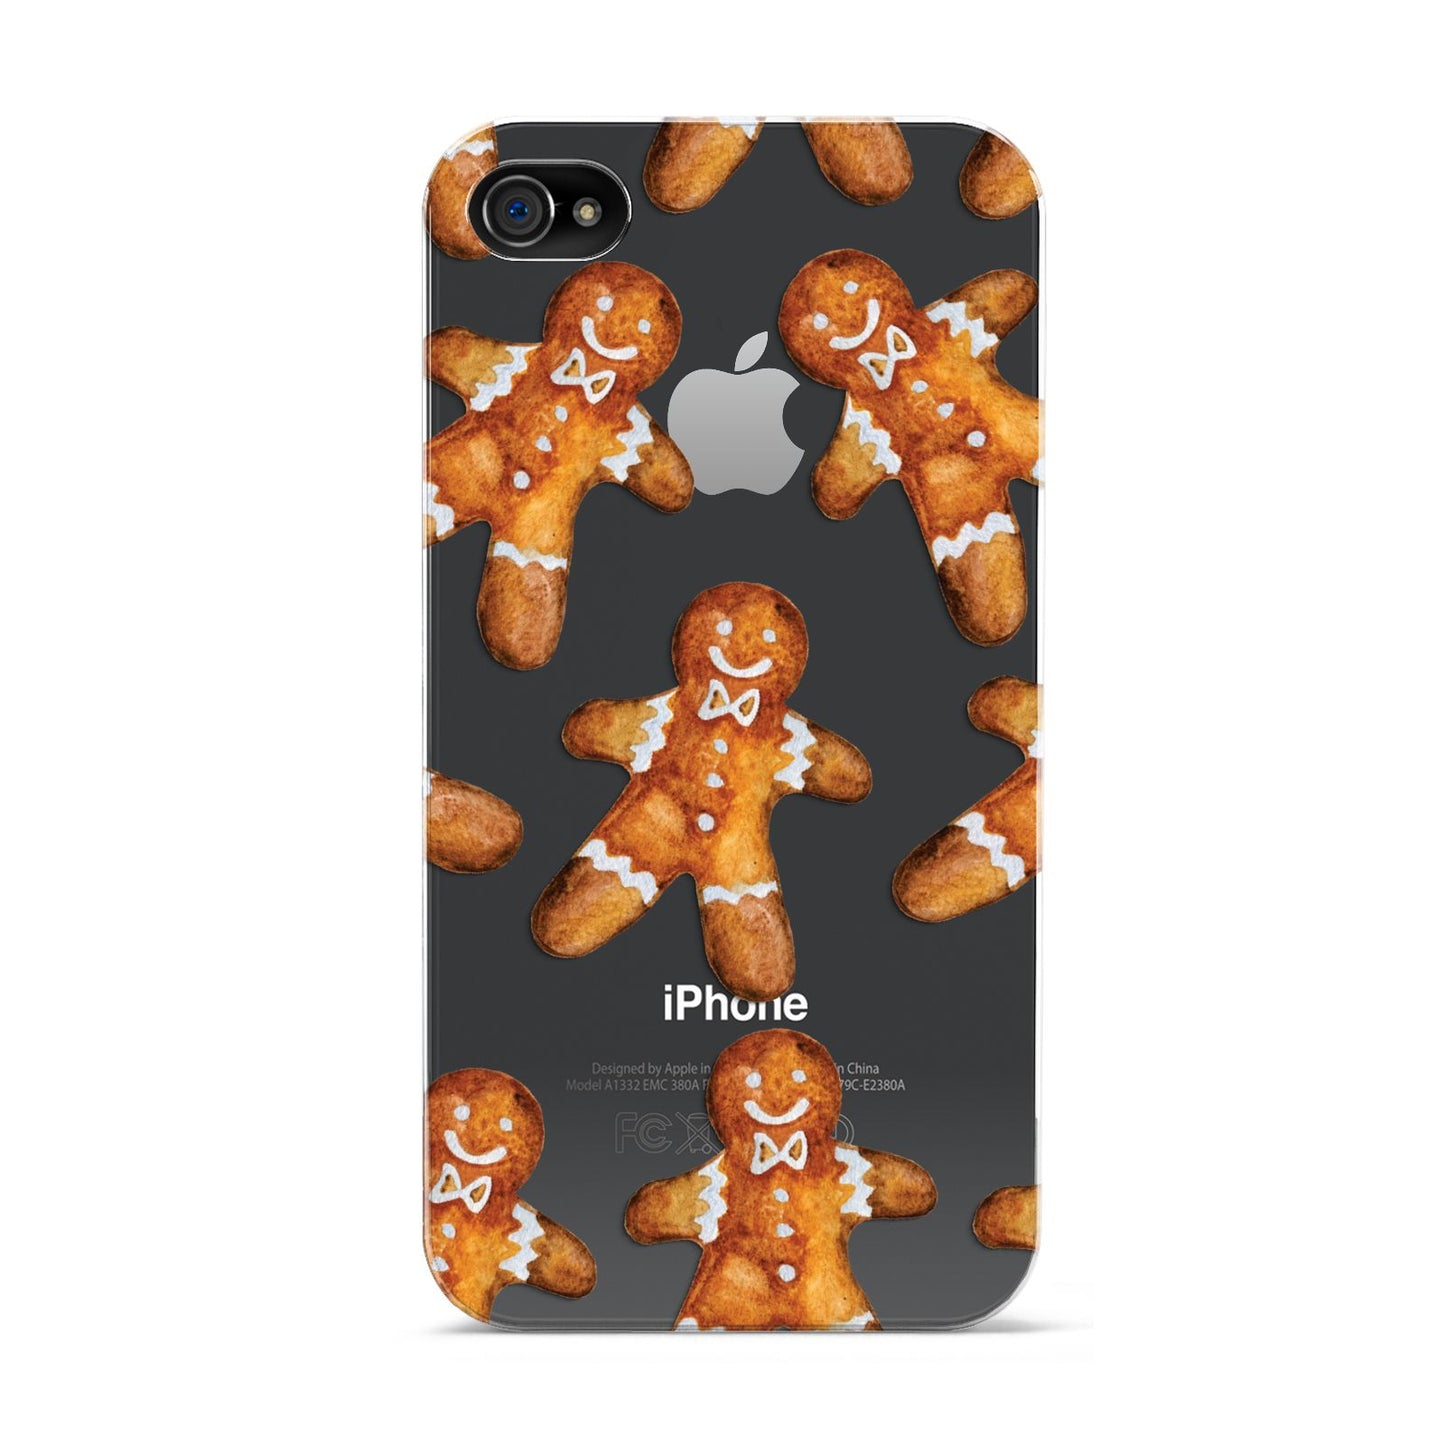 Christmas Gingerbread Man Apple iPhone 4s Case